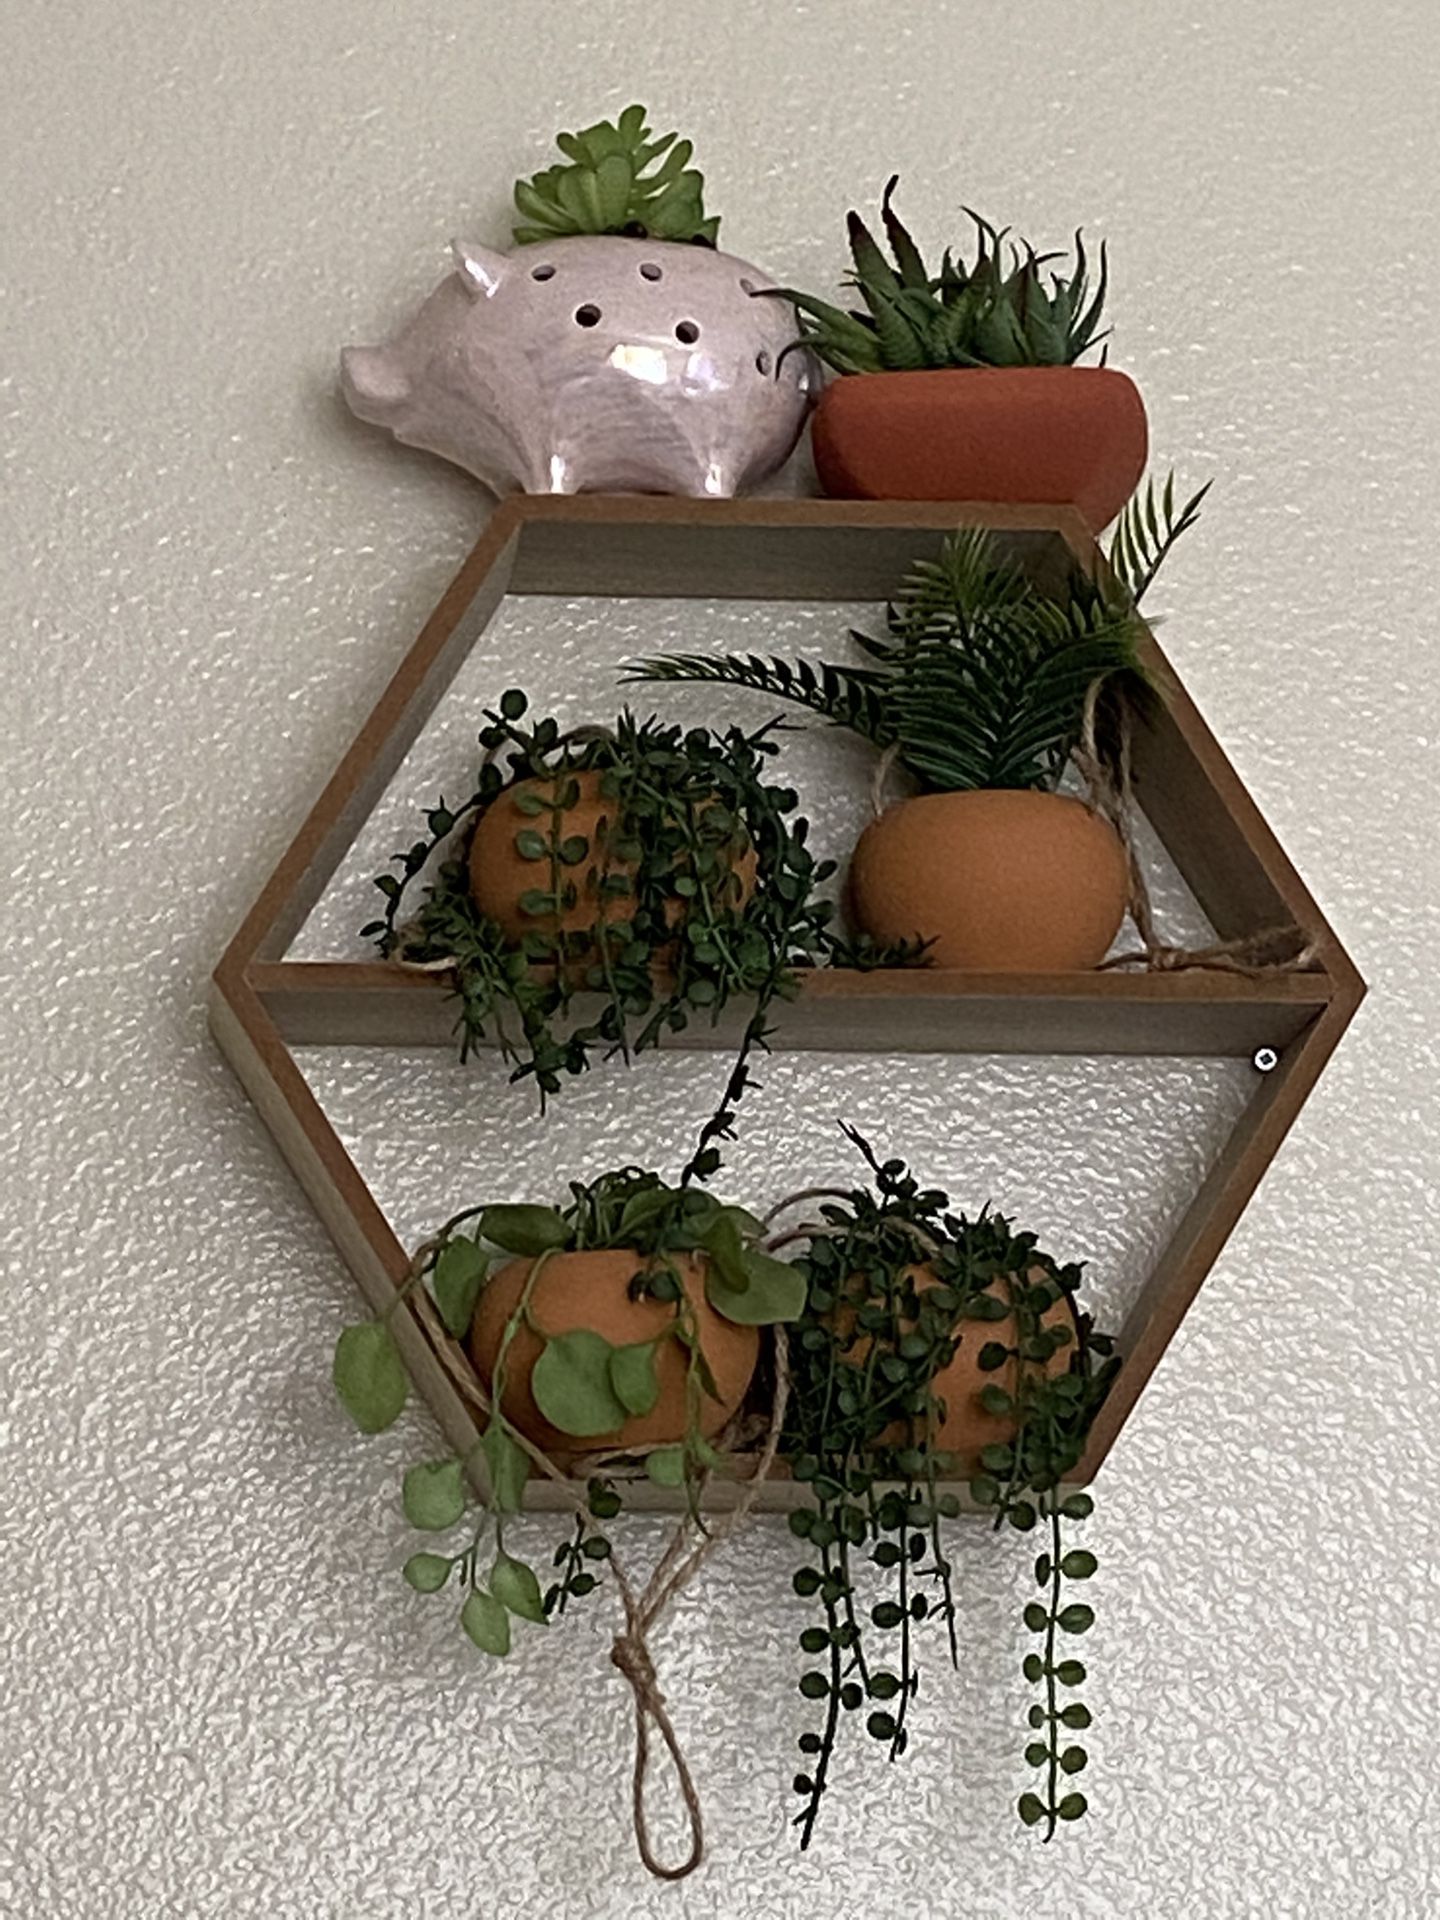 Shelf with fake plants included